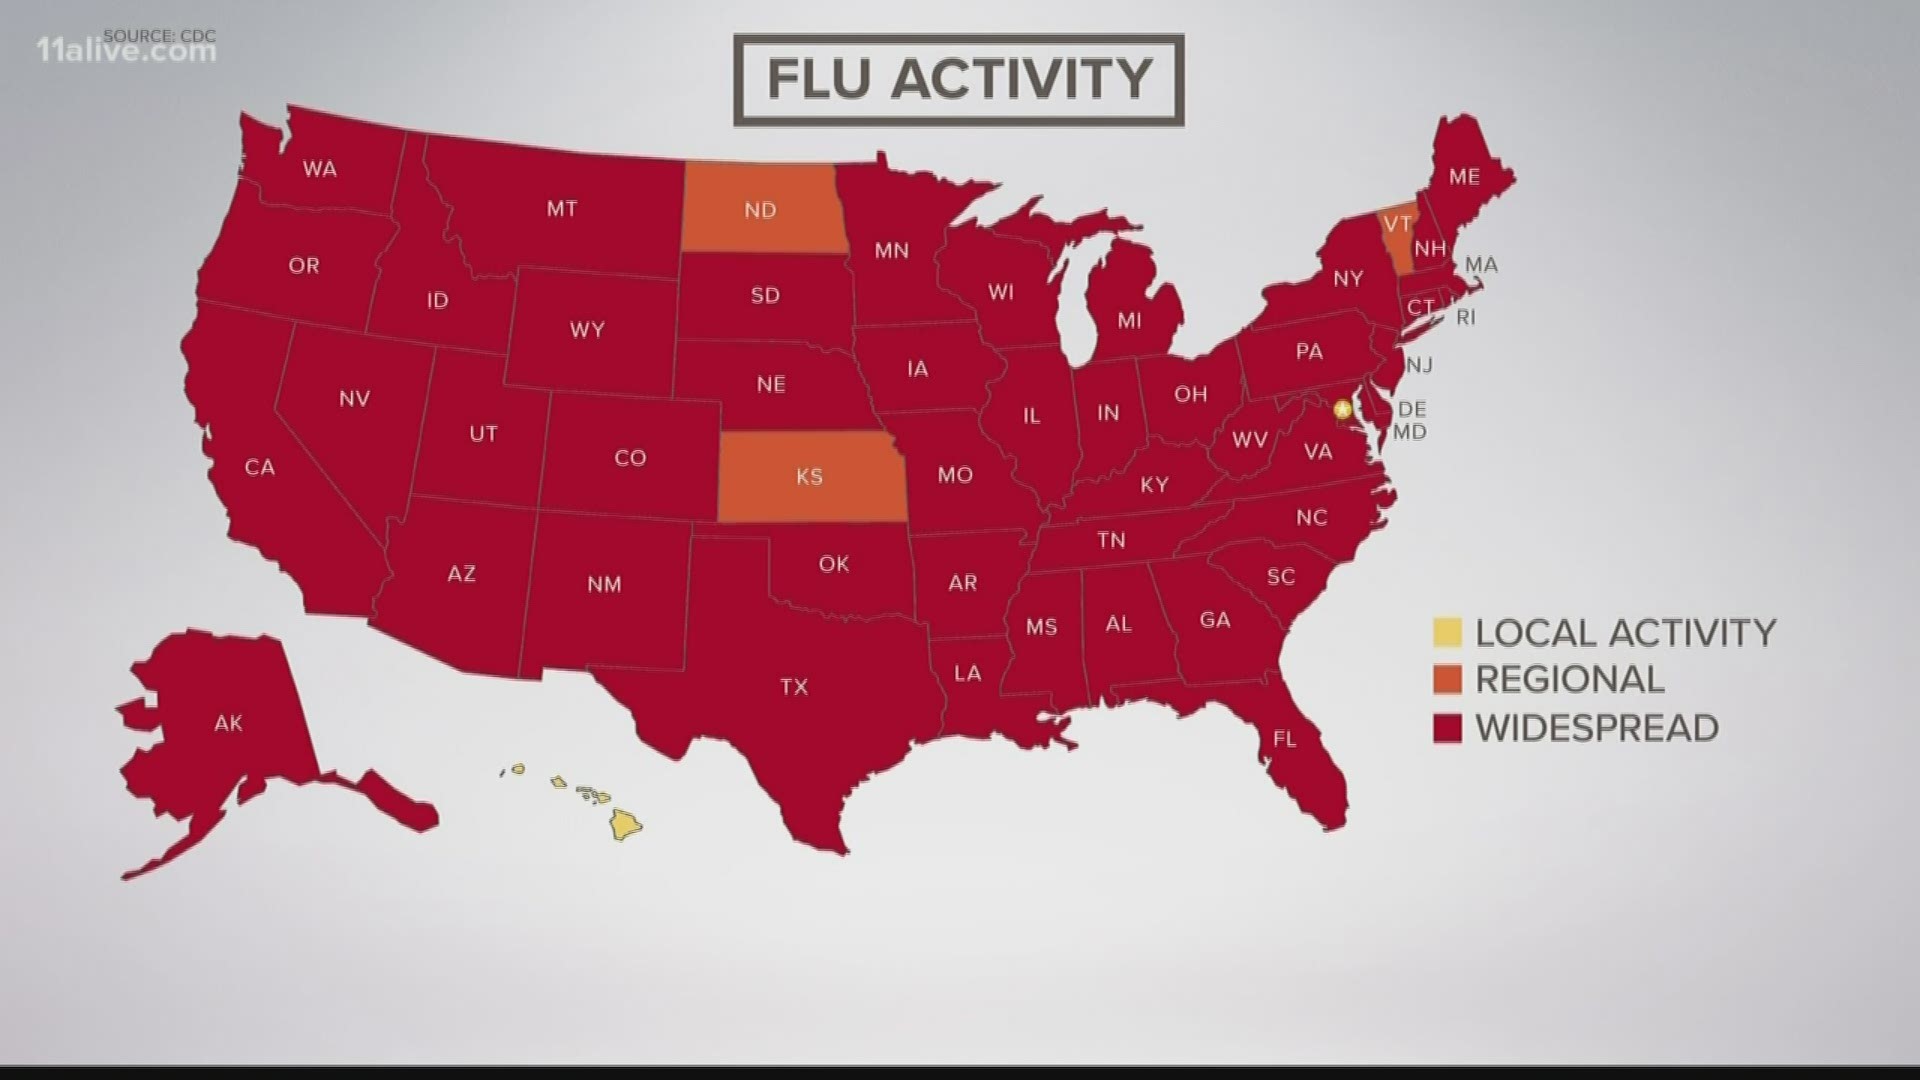 Dr. Reddy talks about how to stay healthy and avoid the flu.